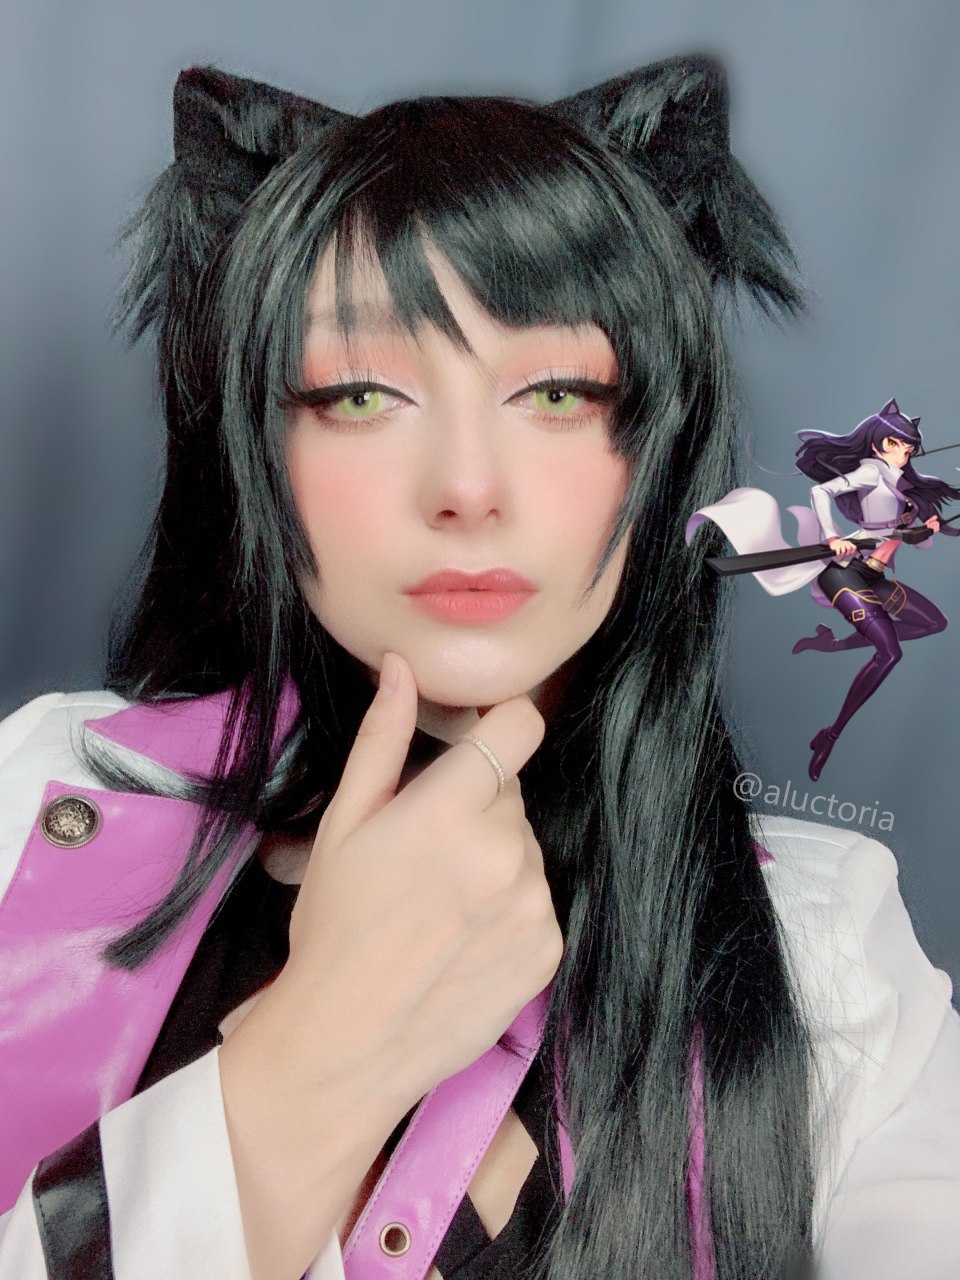 Blake Cosplay By Aluctori